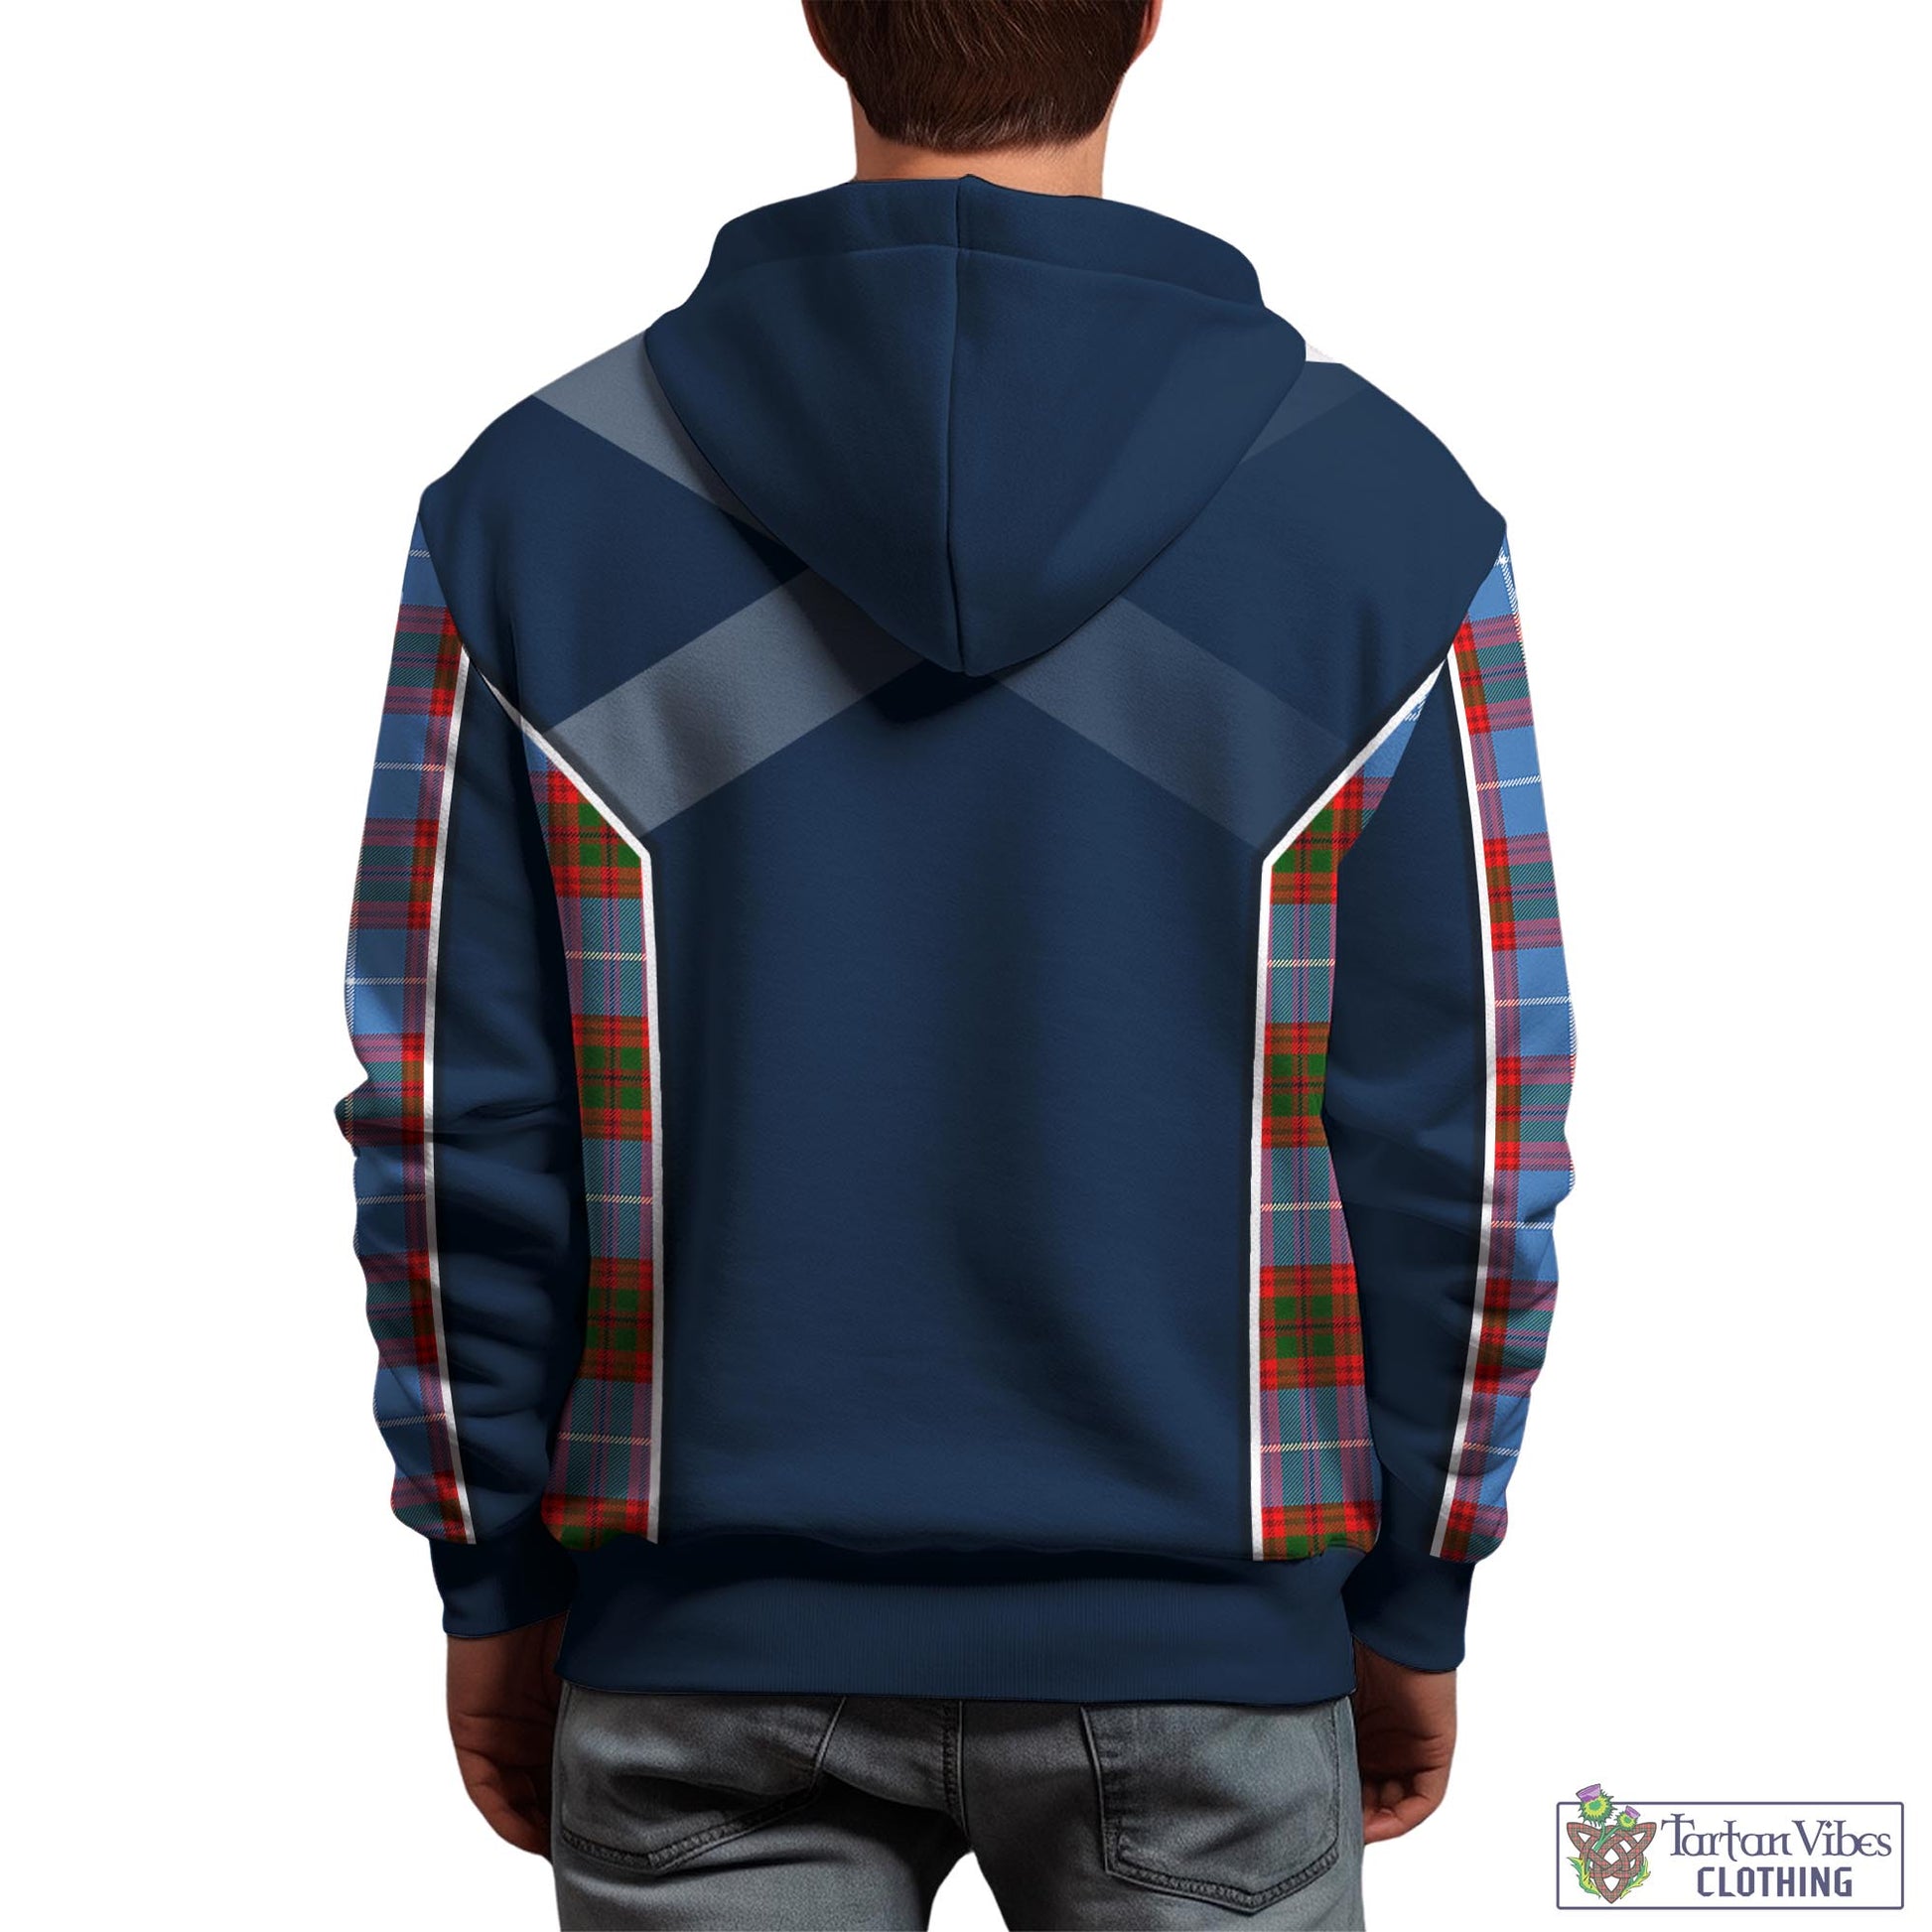 Tartan Vibes Clothing Trotter Tartan Hoodie with Family Crest and Scottish Thistle Vibes Sport Style